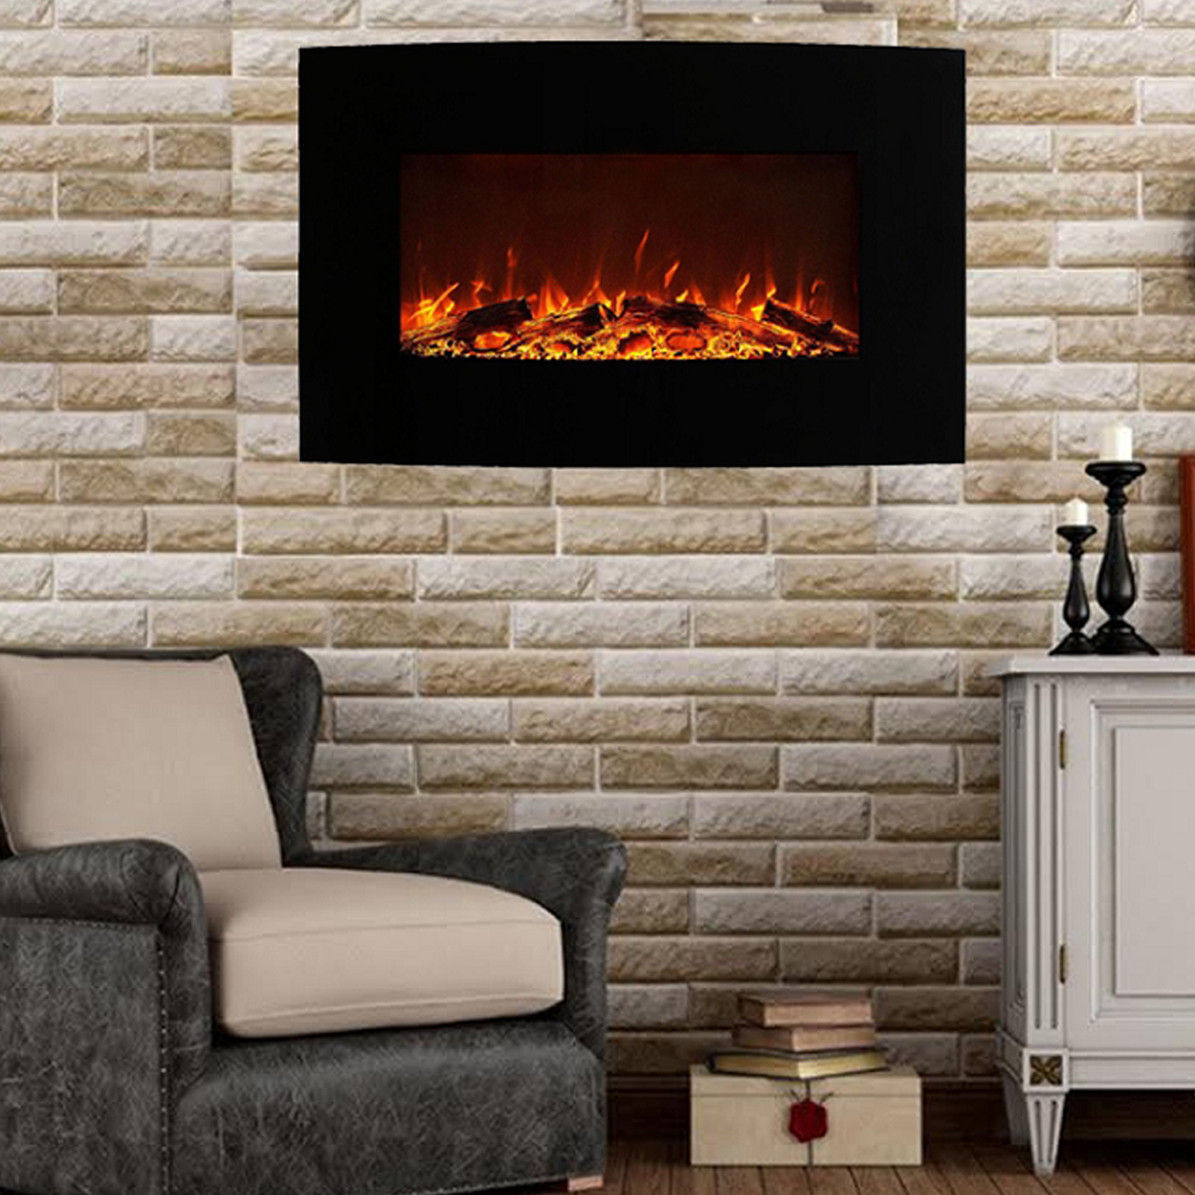 Wall Hung Electric Fireplace
 Madison 35 Inch Ventless Heater Electric Wall Mounted